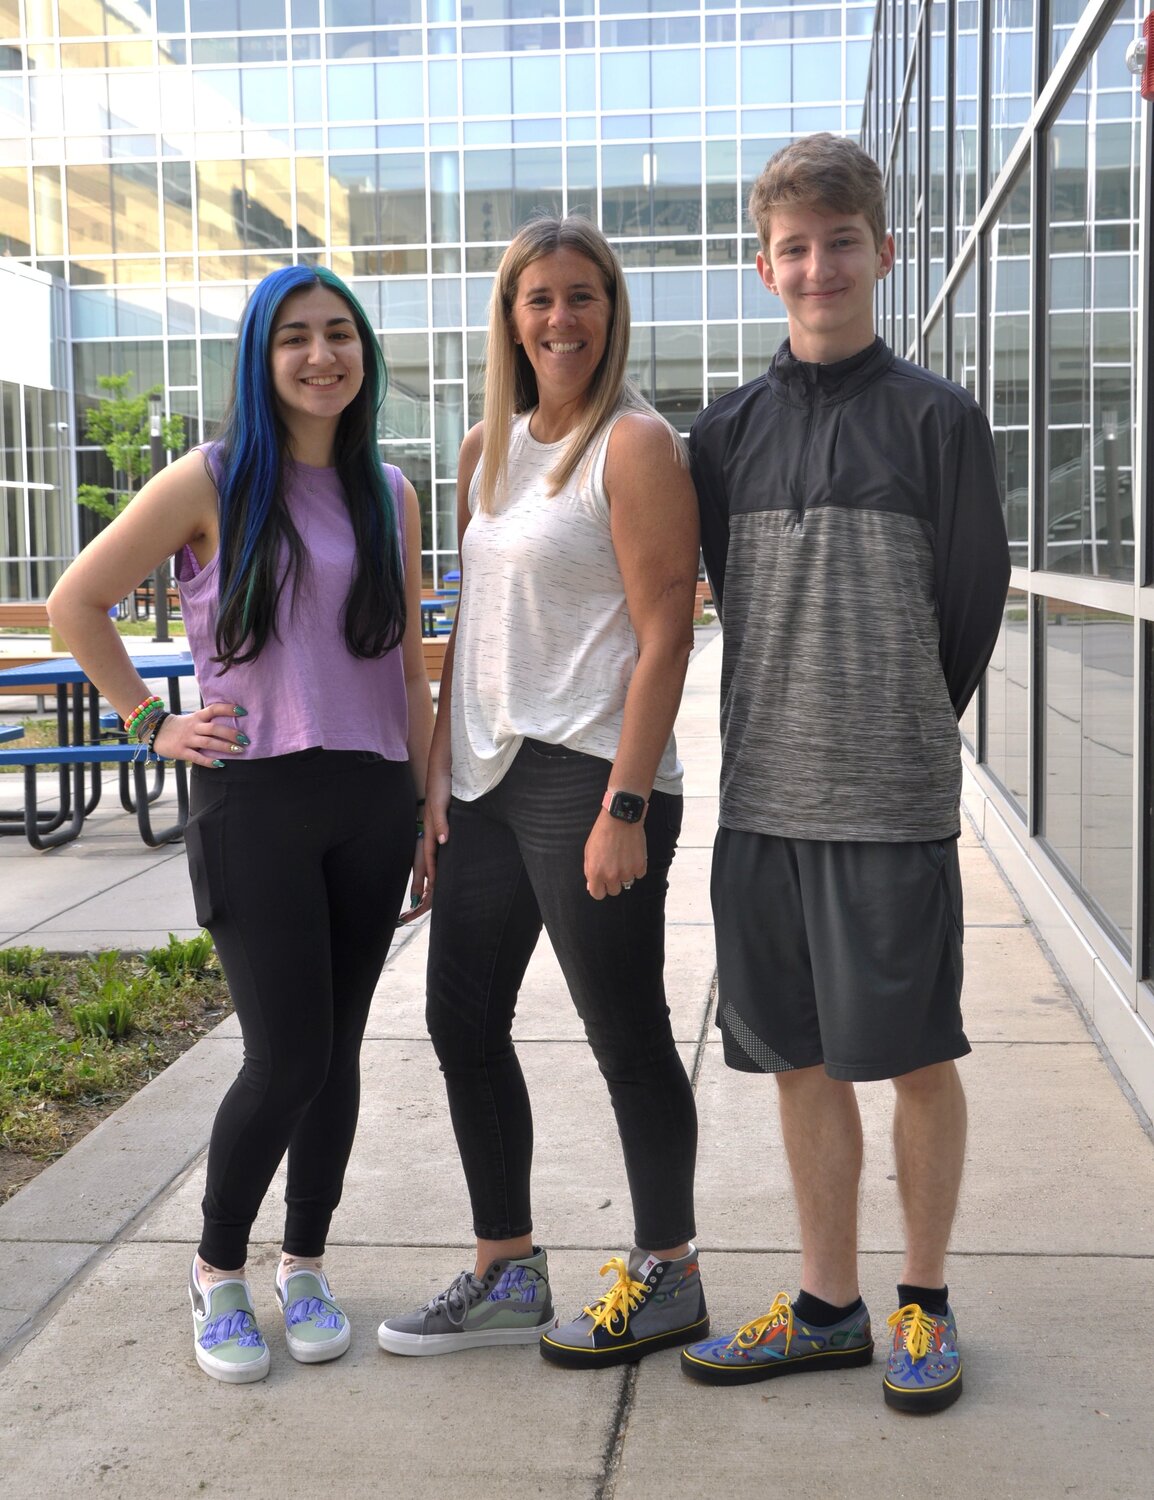 Severna Park High School principal Lindsay Abruzzo stood between senior Nadia Abdolahi and sophomore Jameson Murray, the winners of the school’s Vans shoe design contest. Abruzzo was sporting Nadia’s shoe design on one foot and Jameson’s design on the other.